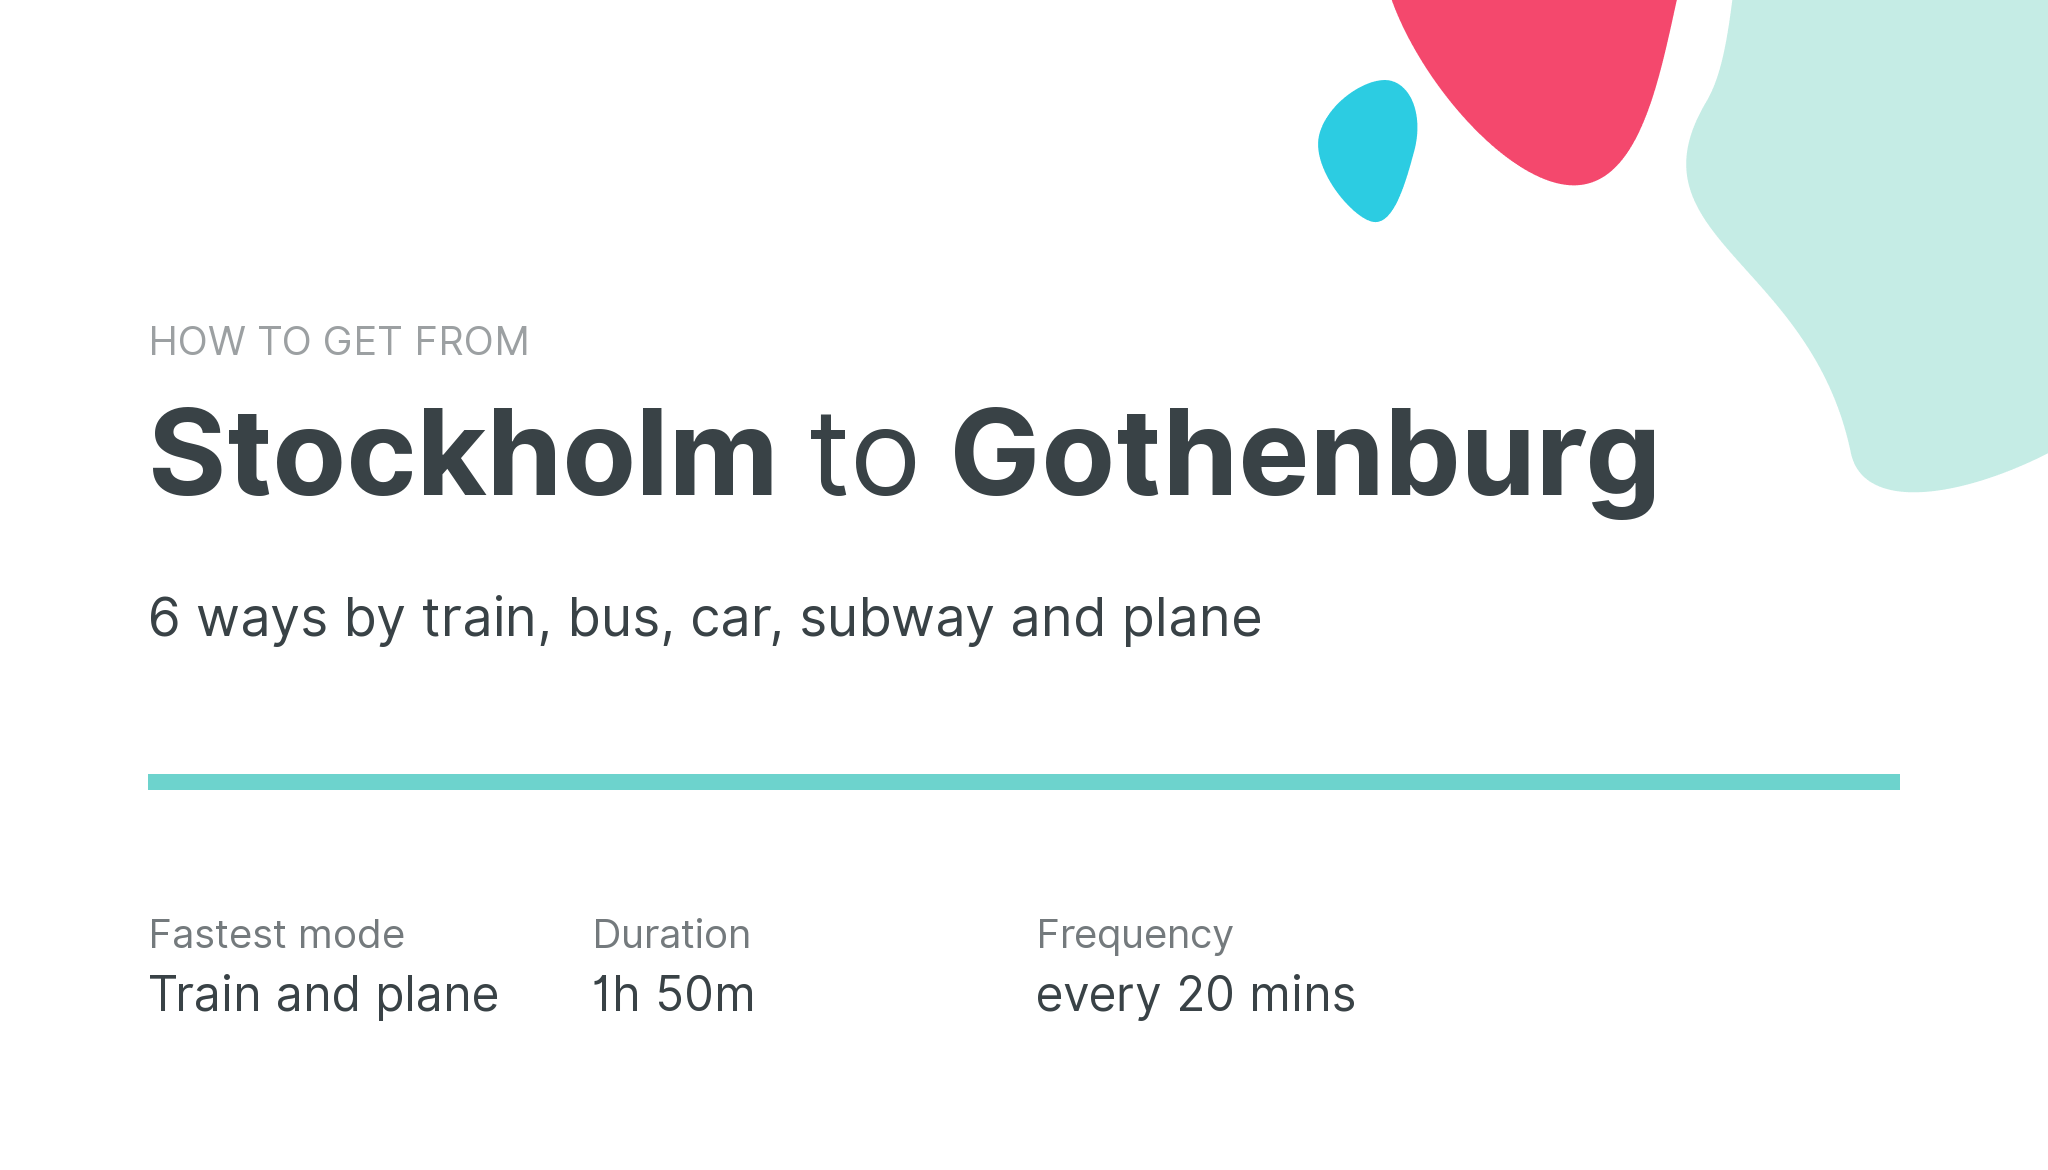 How do I get from Stockholm to Gothenburg